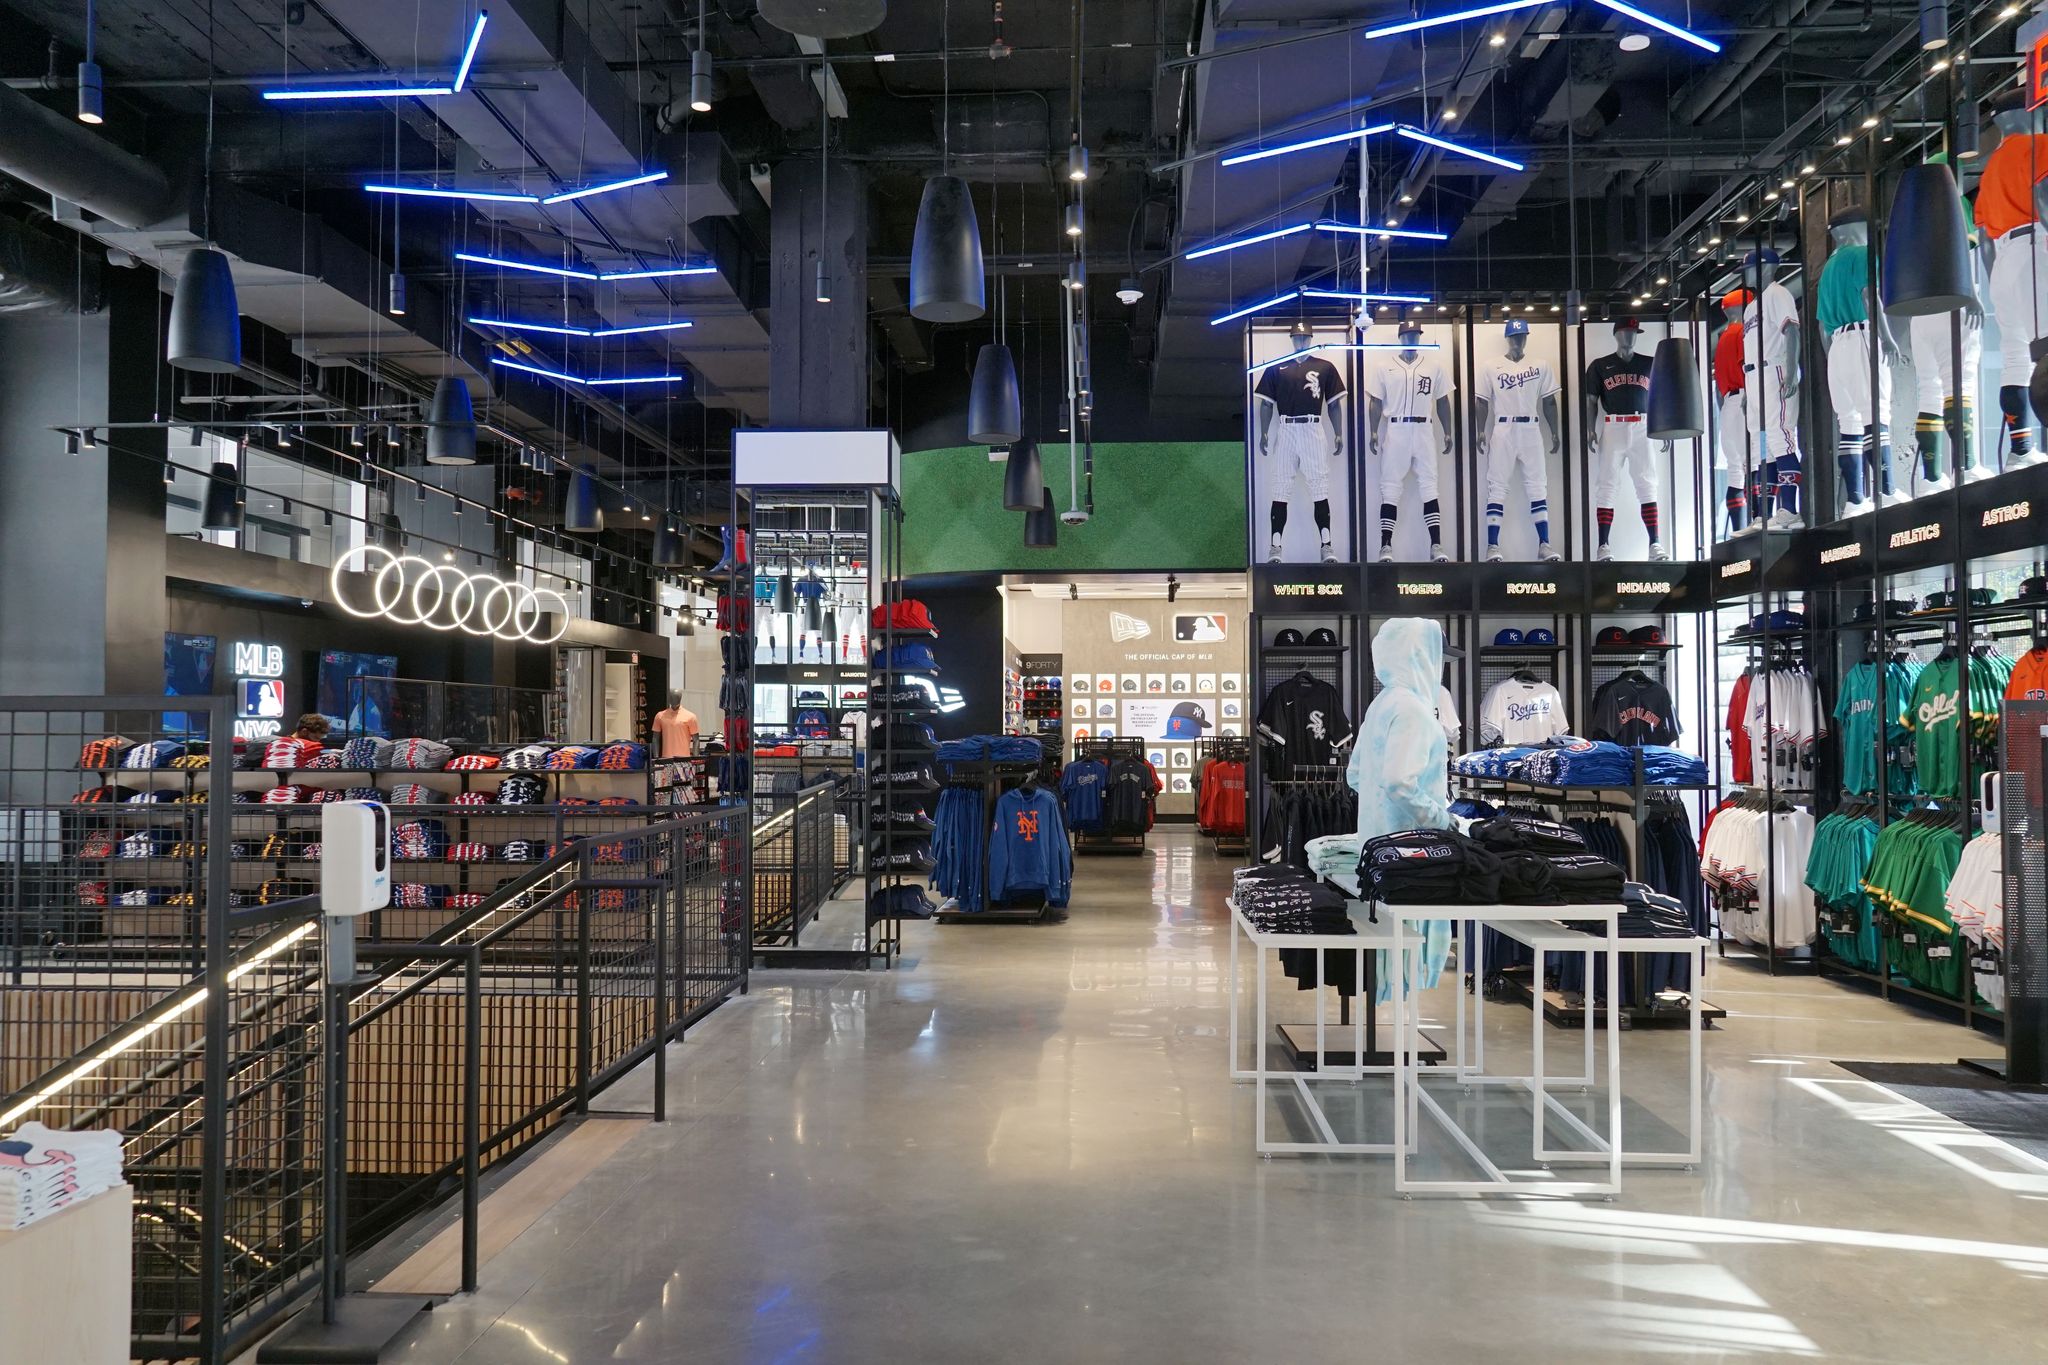 The MLB's new flagship store in NYC looks like baseball Valhalla, This is  the Loop